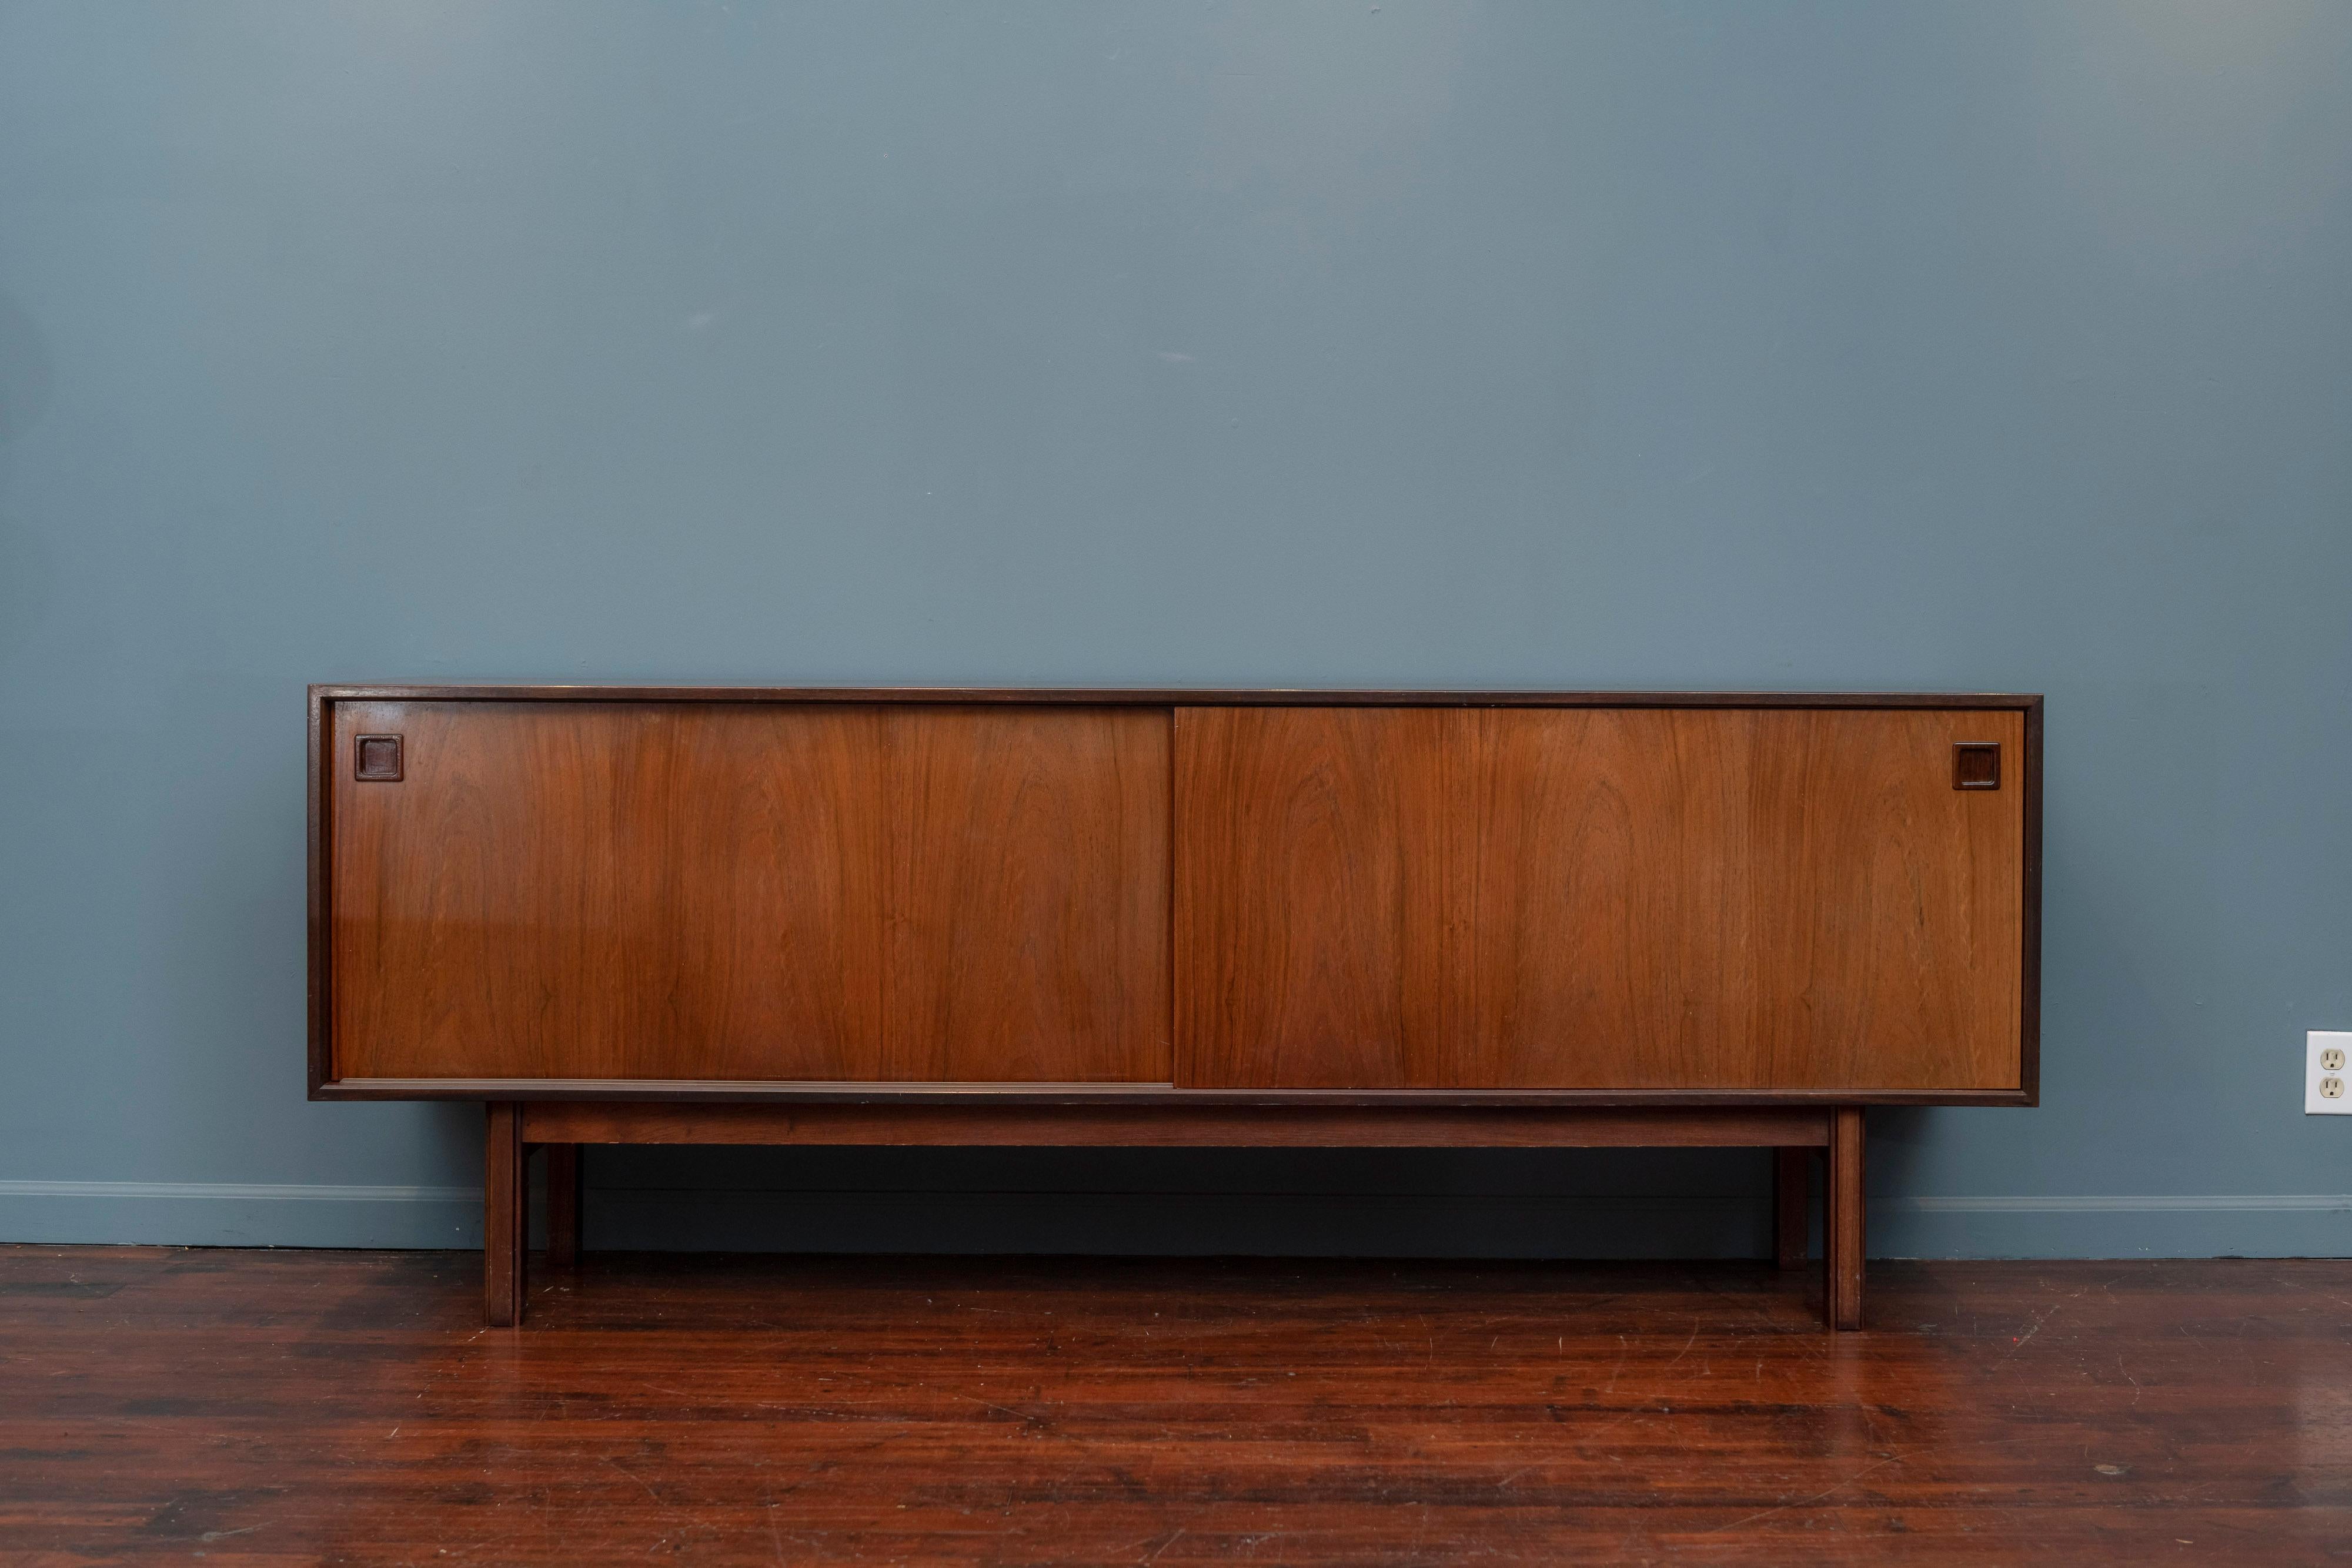 Scandinavian Modern rosewood credenza designed by Gunni Omann for Omann Jun, Model 21.
 Elegant and clean design with two large doors that slide effortlessly with fitted interior drawers and shelves. Very good original condition, labeled.